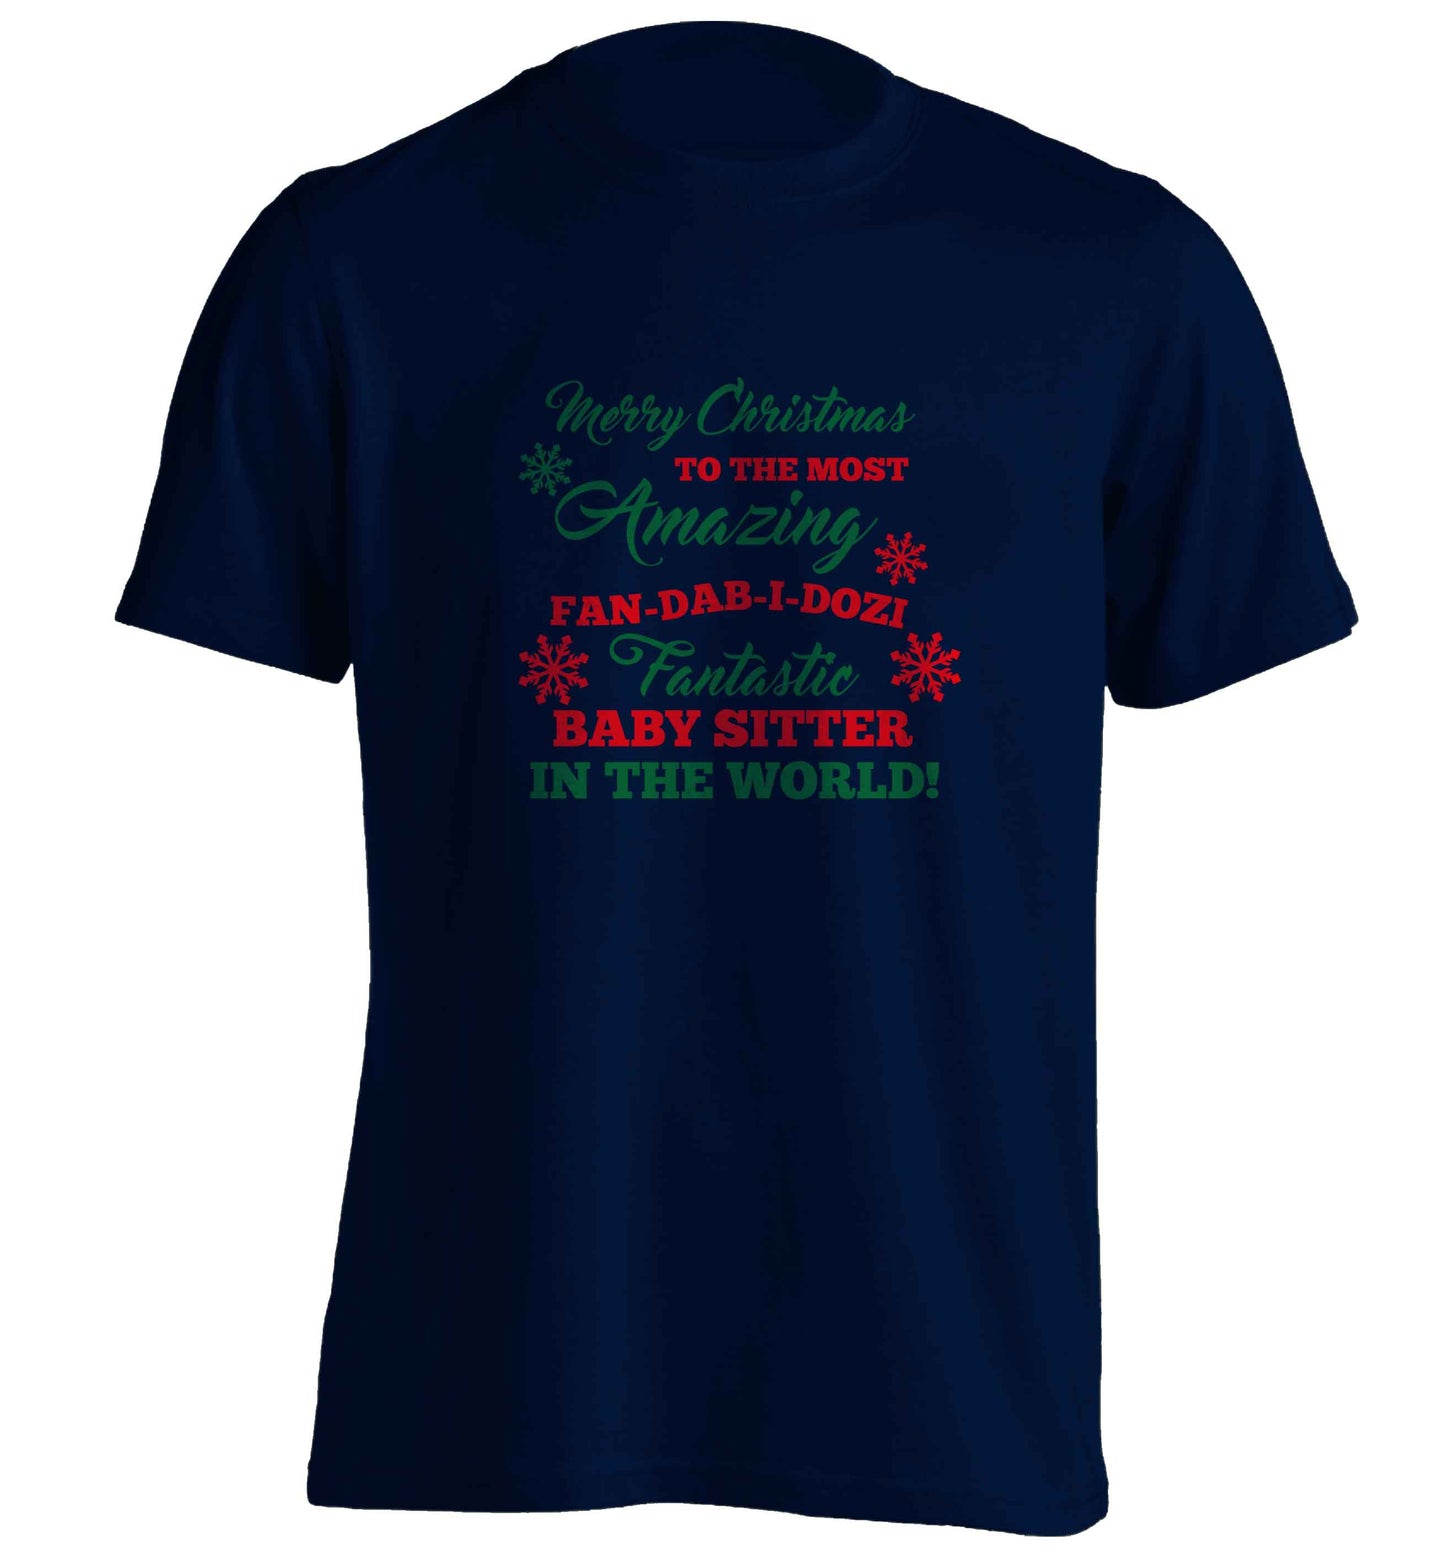 Merry Christmas to the most amazing fan-dab-i-dozi fantasic baby sitter in the world adults unisex navy Tshirt 2XL